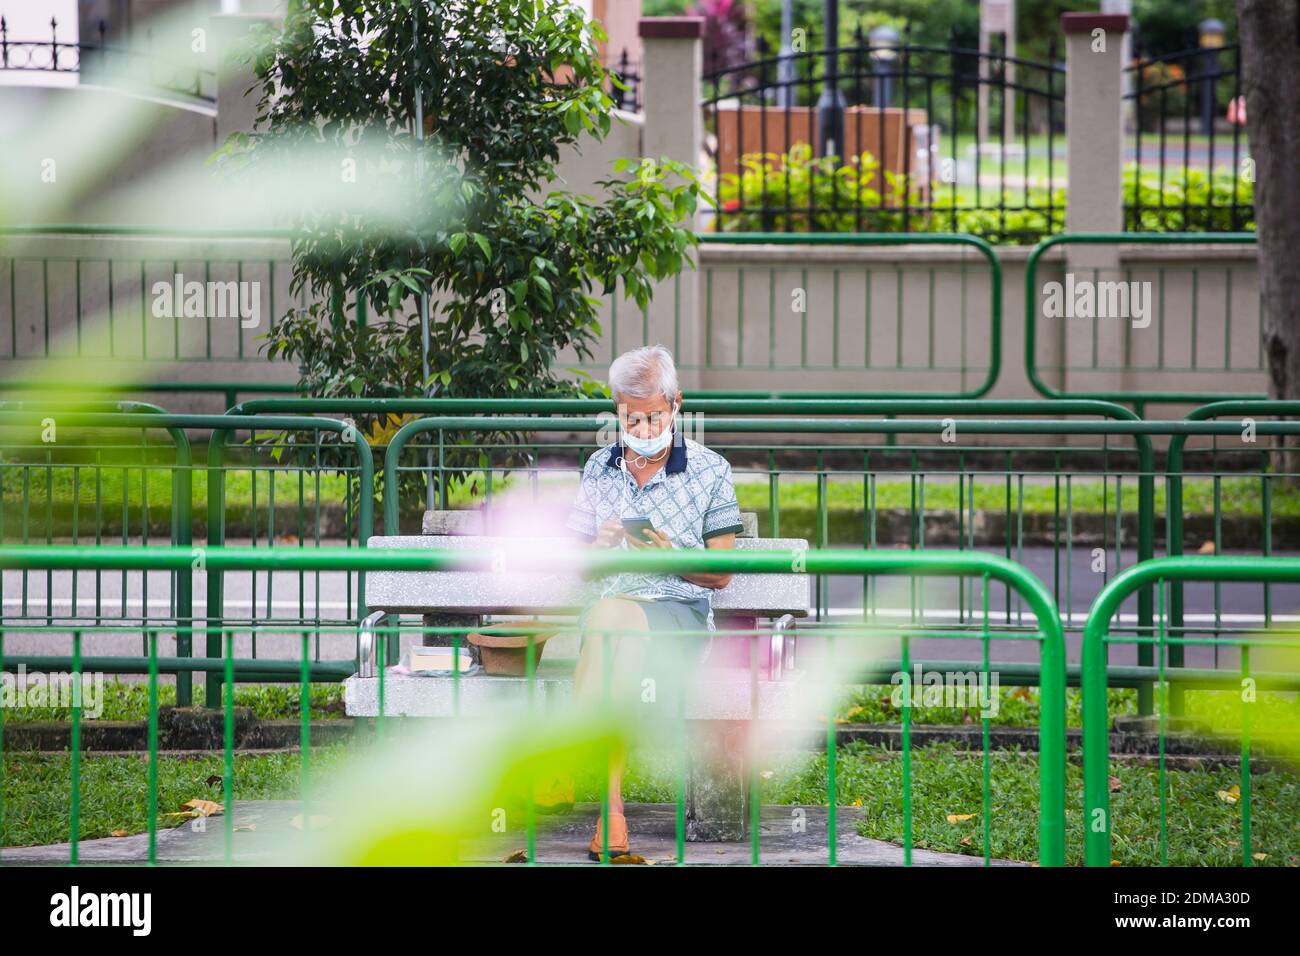 As the pandemic is still on-going, Singaporeans are very discipline to wear a mask, here is an old man wearing a mask sitting in the public park area. Stock Photo